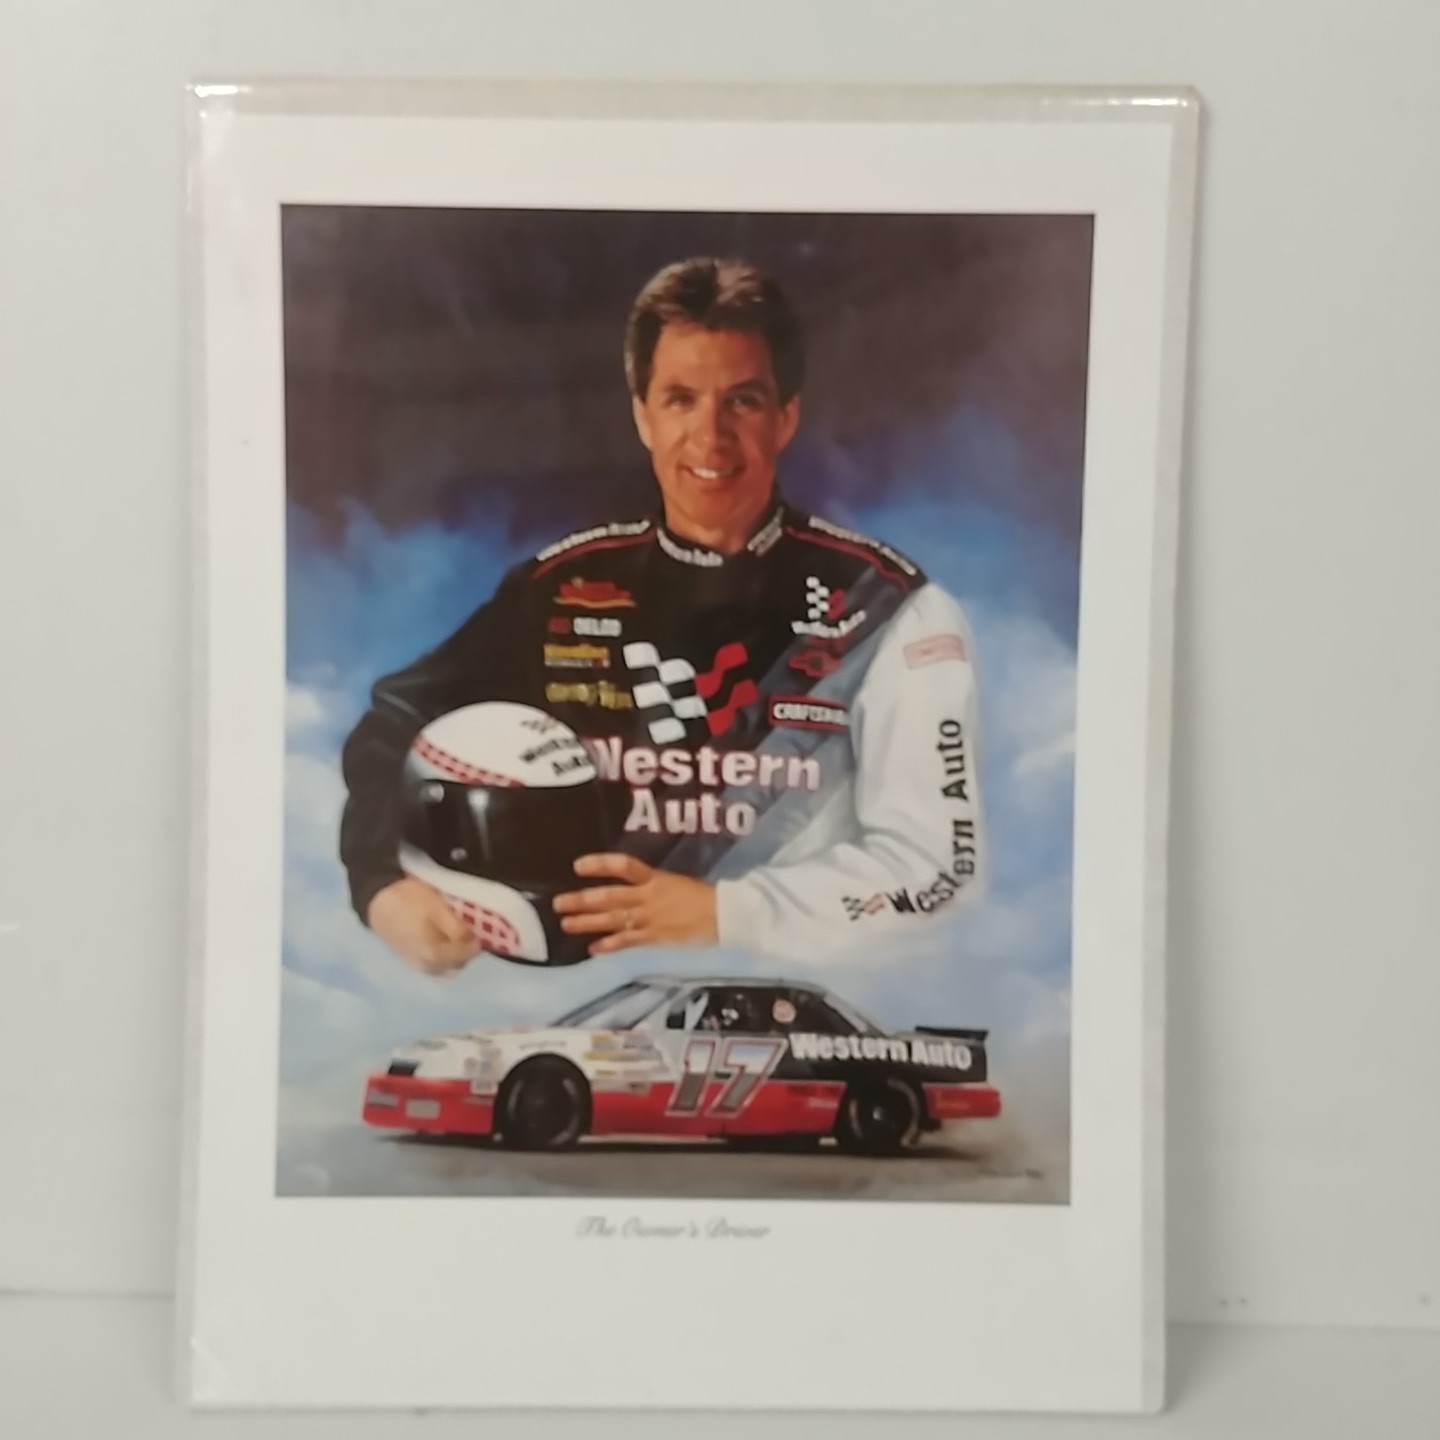 1994 Darrell Waltrip Western Auto "The Driver's Owner" print by Jeanne Barnes